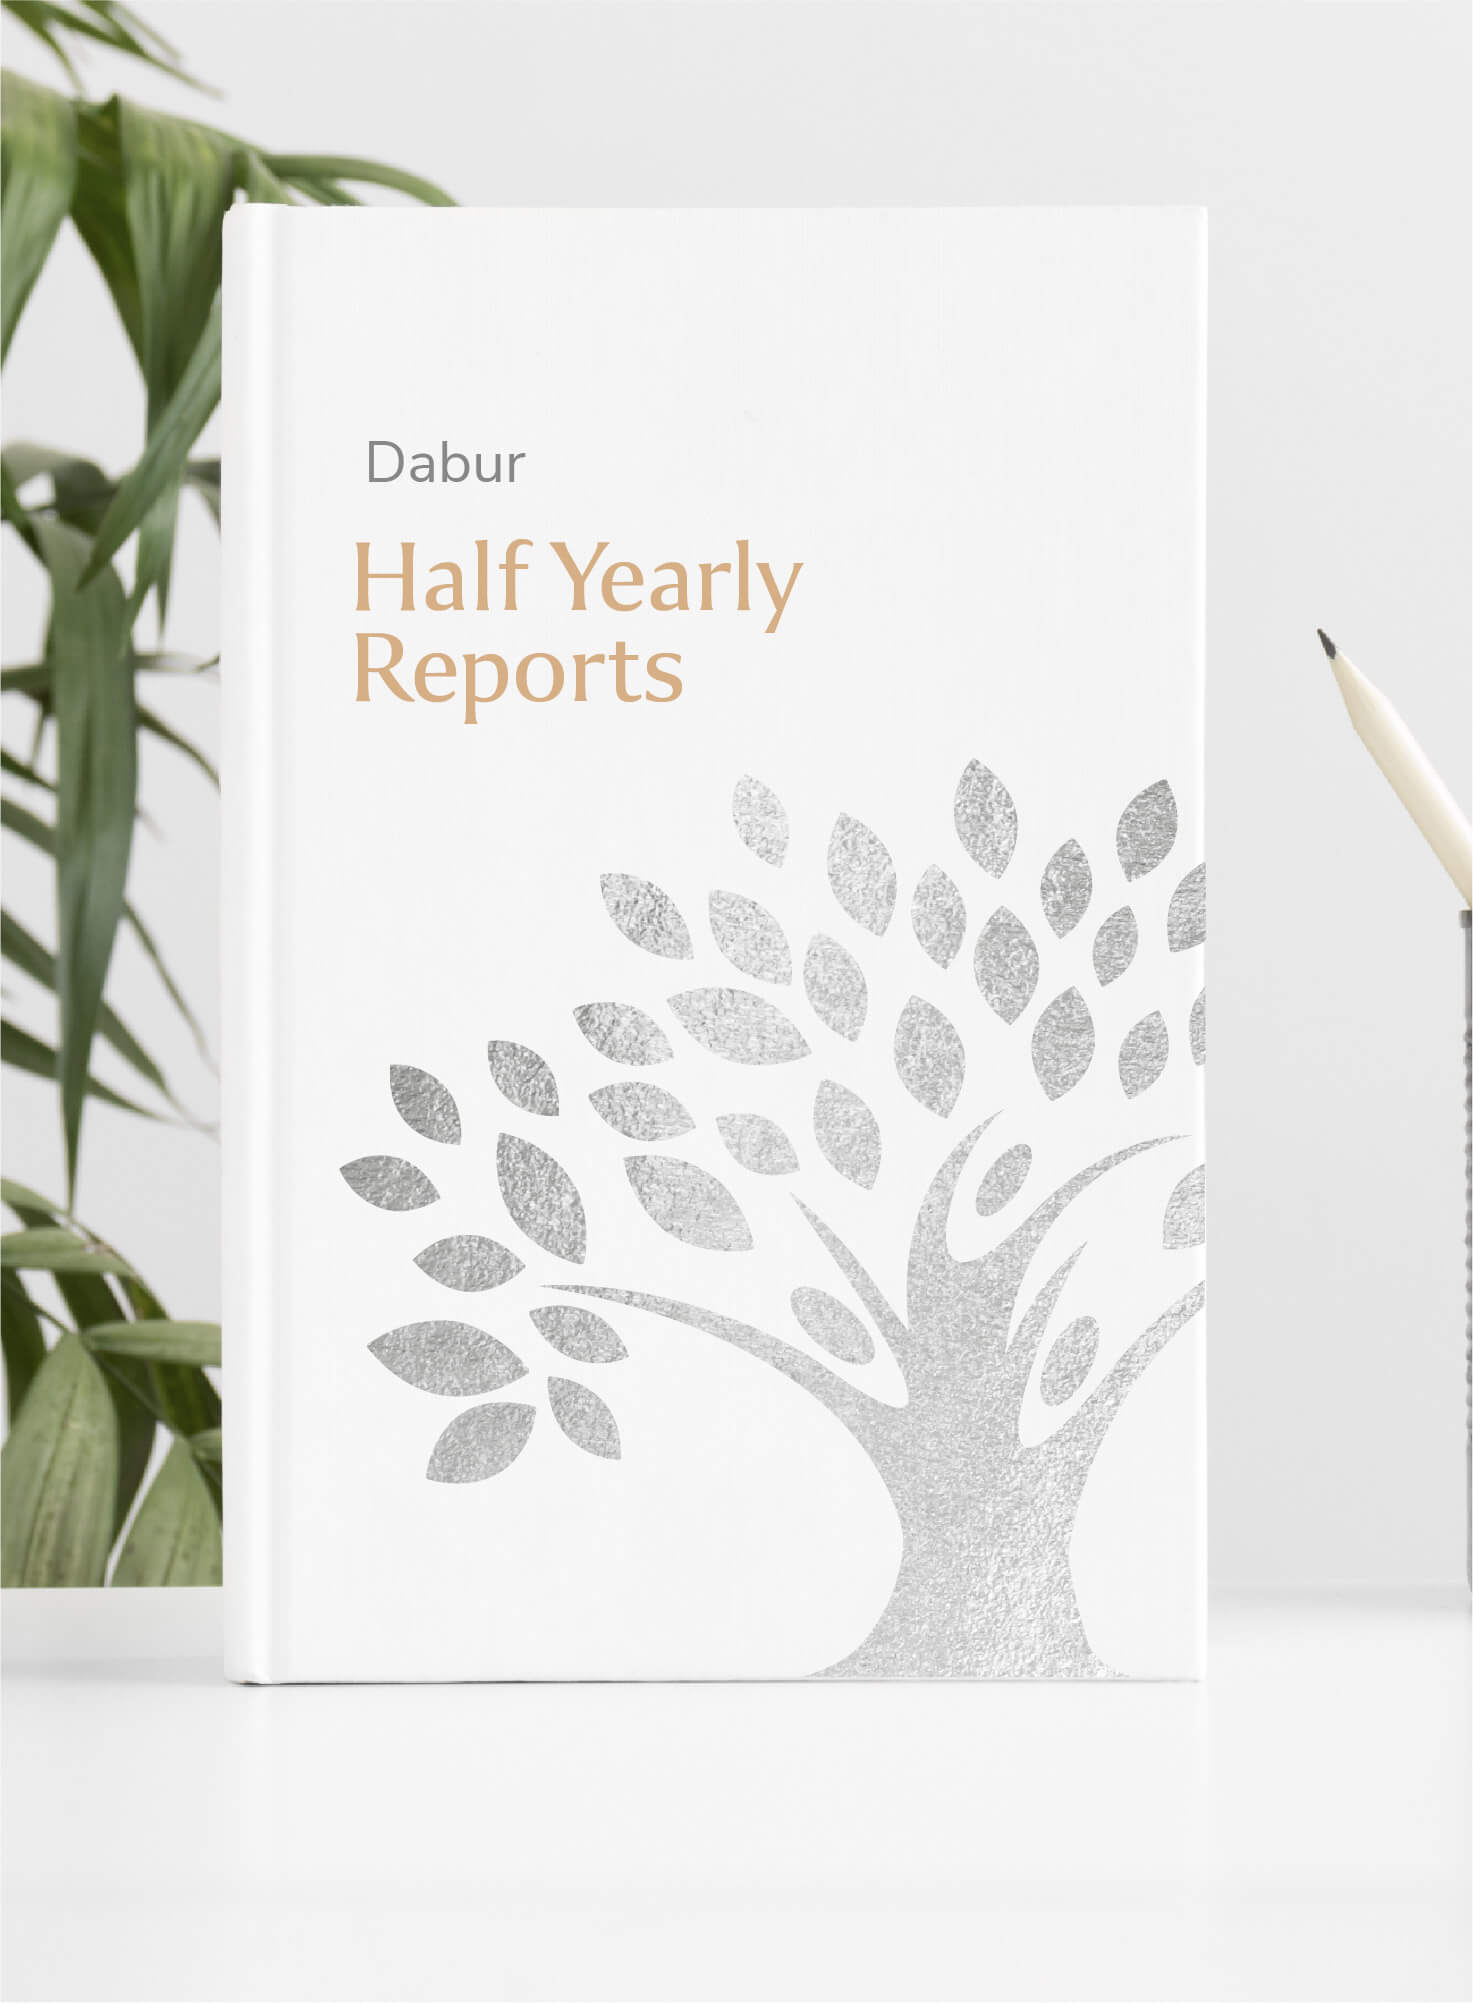 Half Yearly Reports